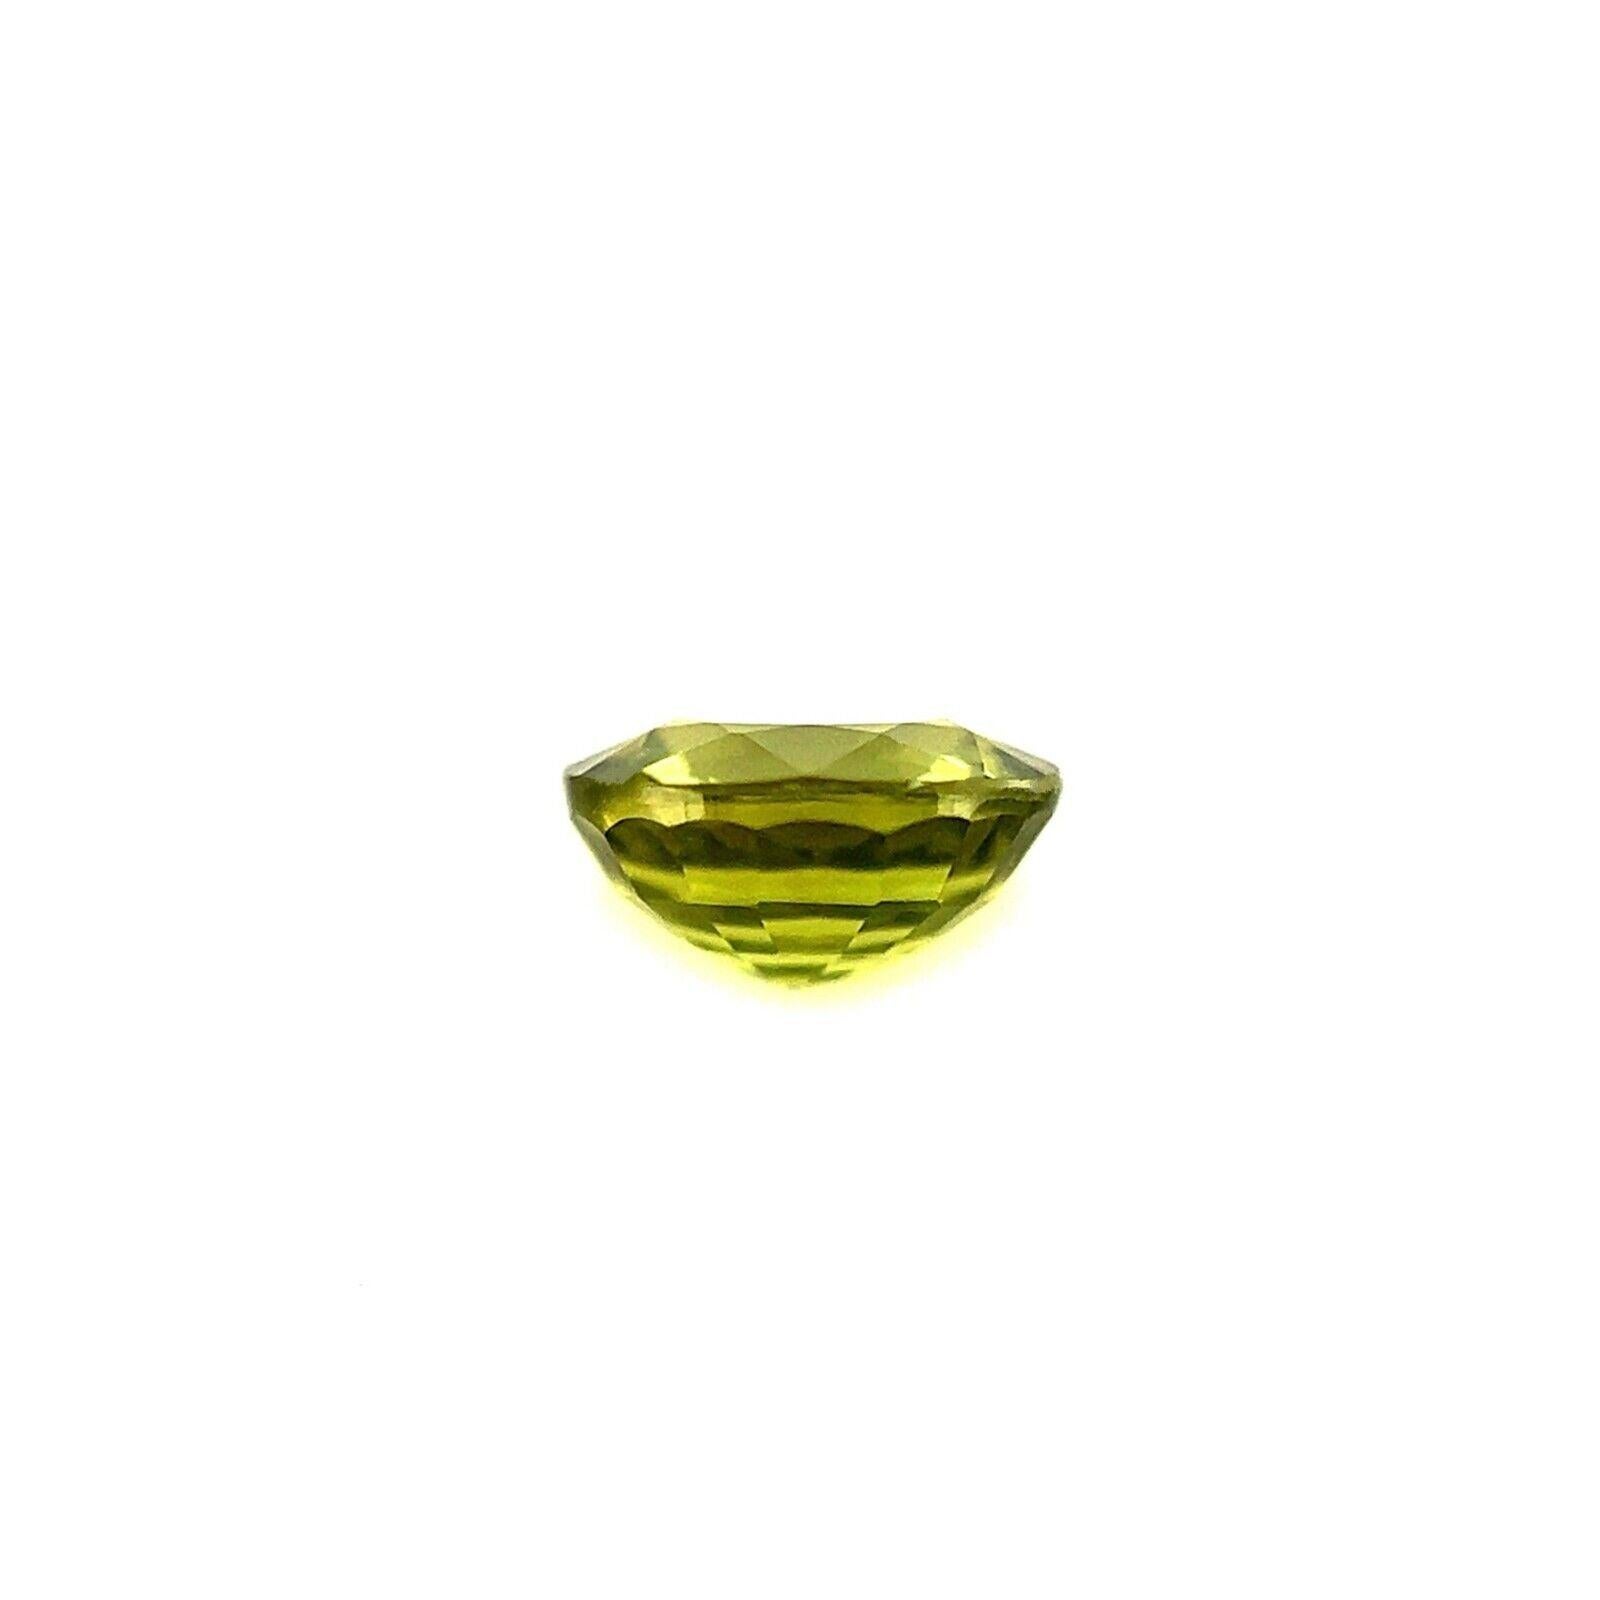 0.72ct Fine Vivid Green Natural Sapphire Oval Cut Loose Rare Gem 5.3x5mm VS

Fine Natural Vivid Green Sapphire Gemstone. 0.72 Carat stone with a beautiful vivid green colour and excellent clarity, a very clean stone. Also has an excellent oval cut